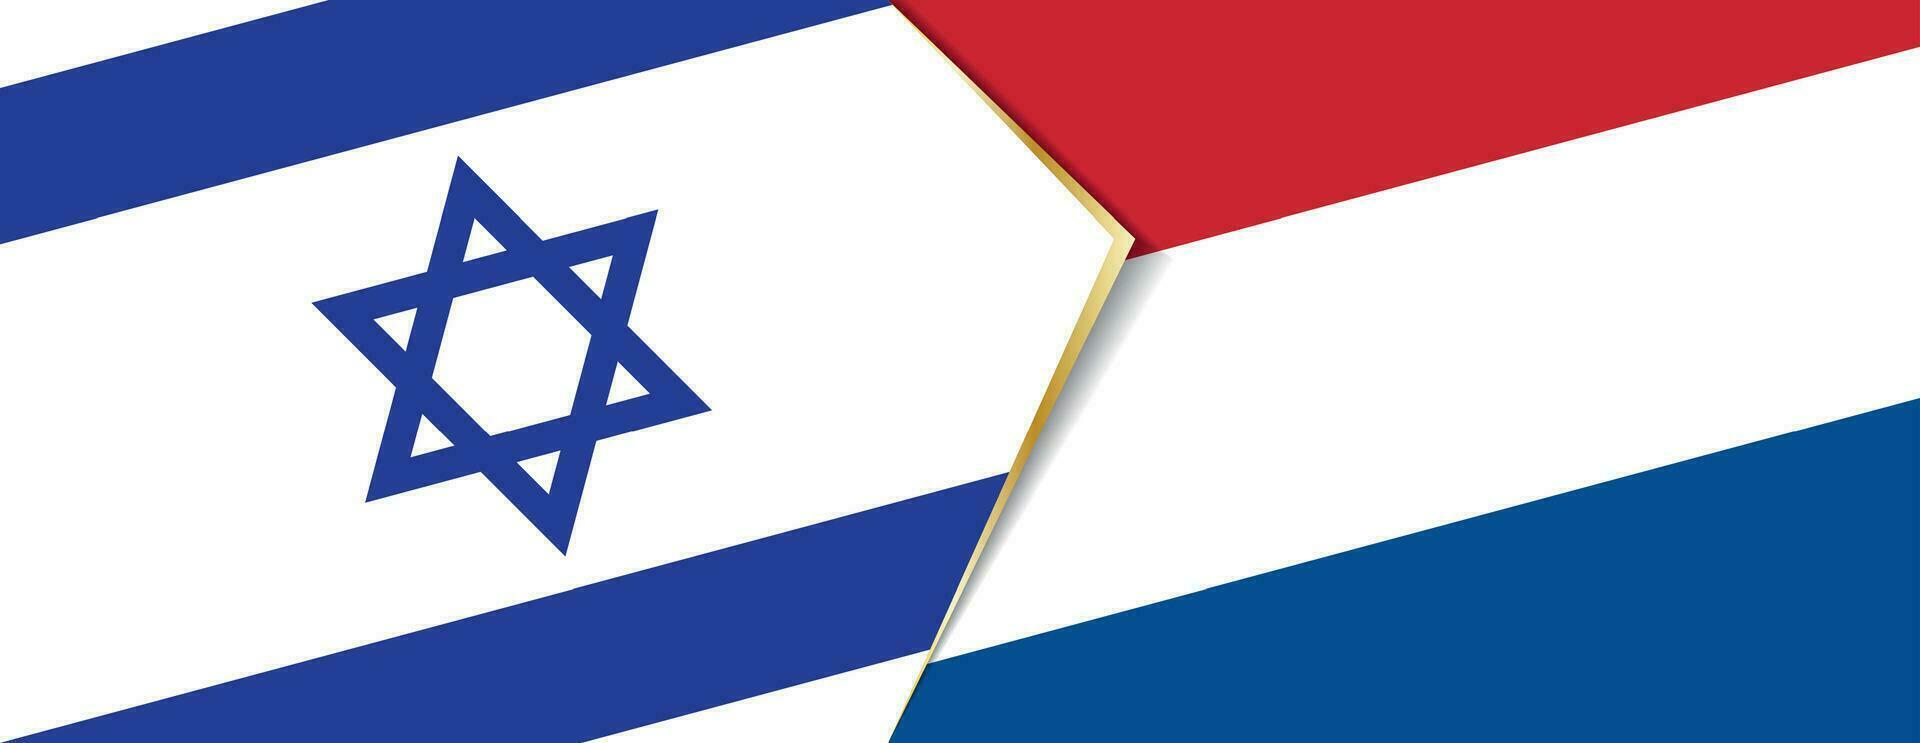 Israel and Netherlands flags, two vector flags.